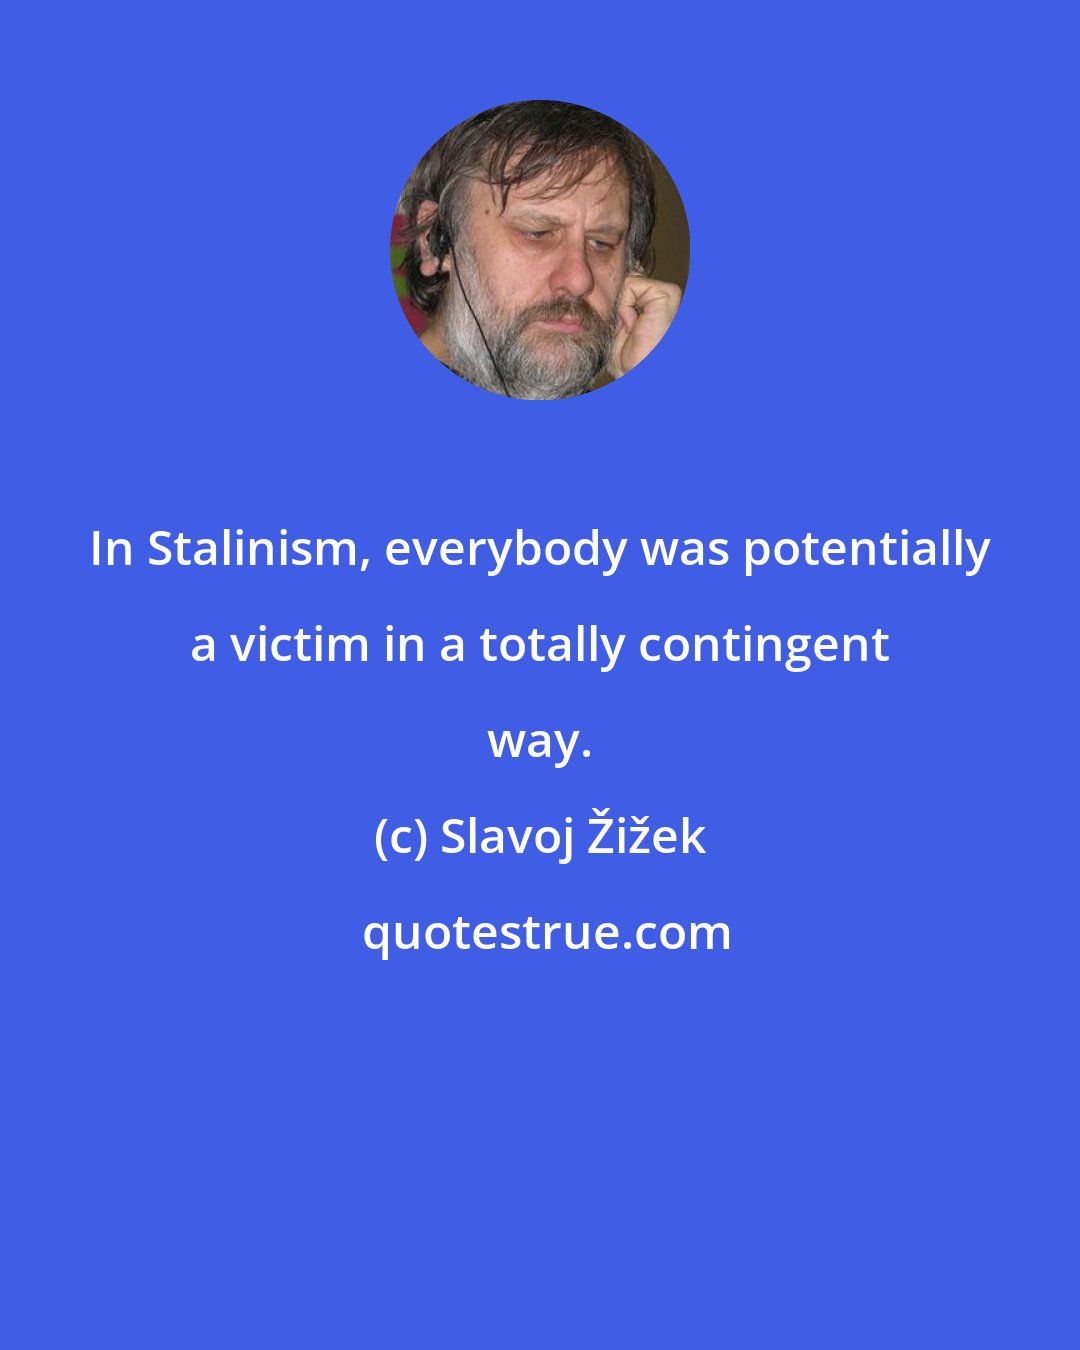 Slavoj Žižek: In Stalinism, everybody was potentially a victim in a totally contingent way.